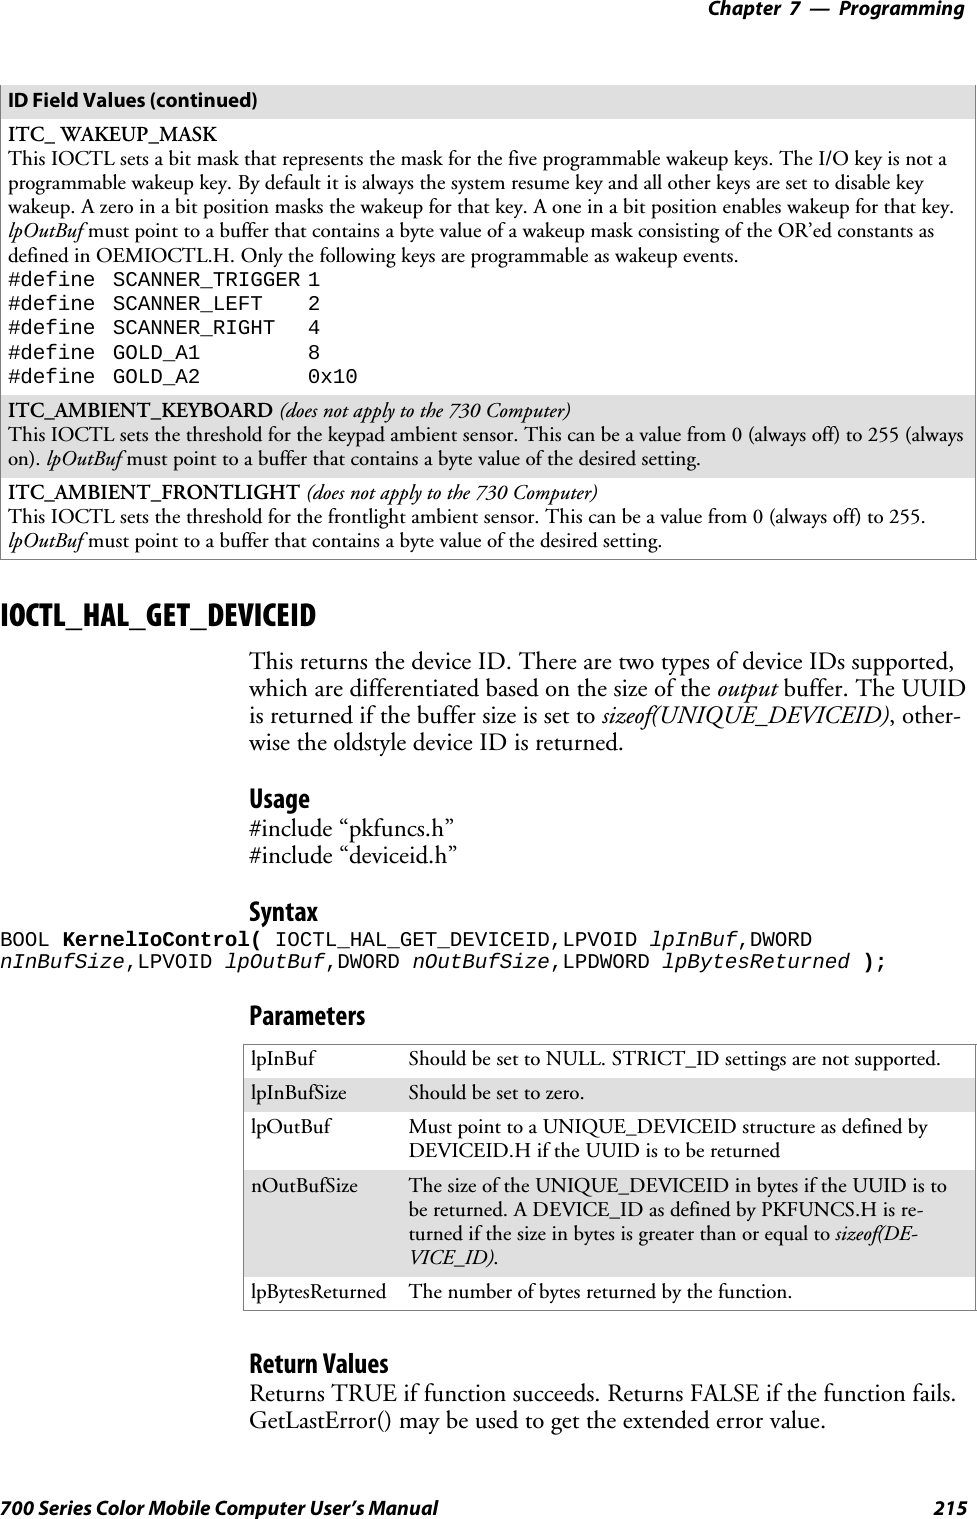 Programming—Chapter 7215700 Series Color Mobile Computer User’s ManualID Field Values (continued)ITC_ WAKEUP_MASKThis IOCTL sets a bit mask that represents the mask for the five programmable wakeup keys. The I/O key is not aprogrammable wakeup key. By default it is always the system resume key and all other keys are set to disable keywakeup. A zero in a bit position masks the wakeup for that key. A one in a bit position enables wakeup for that key.lpOutBuf must point to a buffer that contains a byte value of a wakeup mask consisting of the OR’ed constants asdefinedinOEMIOCTL.H.Onlythefollowingkeysareprogrammableaswakeupevents.#define SCANNER_TRIGGER 1#define SCANNER_LEFT 2#define SCANNER_RIGHT 4#define GOLD_A1 8#define GOLD_A2 0x10ITC_AMBIENT_KEYBOARD (does not apply to the 730 Computer)This IOCTL sets the threshold for the keypad ambient sensor. This can be a value from 0 (always off) to 255 (alwayson). lpOutBuf must point to a buffer that contains a byte value of the desired setting.ITC_AMBIENT_FRONTLIGHT (does not apply to the 730 Computer)This IOCTL sets the threshold for the frontlight ambient sensor. This can be a value from 0 (always off) to 255.lpOutBuf must point to a buffer that contains a byte value of the desired setting.IOCTL_HAL_GET_DEVICEIDThis returns the device ID. There are two types of device IDs supported,which are differentiated based on the size of the output buffer. The UUIDis returned if the buffer size is set to sizeof(UNIQUE_DEVICEID),other-wisetheoldstyledeviceIDisreturned.Usage#include “pkfuncs.h”#include “deviceid.h”SyntaxBOOL KernelIoControl( IOCTL_HAL_GET_DEVICEID,LPVOID lpInBuf,DWORDnInBufSize,LPVOID lpOutBuf,DWORD nOutBufSize,LPDWORD lpBytesReturned );ParameterslpInBuf Should be set to NULL. STRICT_ID settings are not supported.lpInBufSize Should be set to zero.lpOutBuf Must point to a UNIQUE_DEVICEID structure as defined byDEVICEID.H if the UUID is to be returnednOutBufSize The size of the UNIQUE_DEVICEID in bytes if the UUID is tobe returned. A DEVICE_ID as defined by PKFUNCS.H is re-turned if the size in bytes is greater than or equal to sizeof(DE-VICE_ID).lpBytesReturned The number of bytes returned by the function.Return ValuesReturns TRUE if function succeeds. Returns FALSE if the function fails.GetLastError() may be used to get the extended error value.